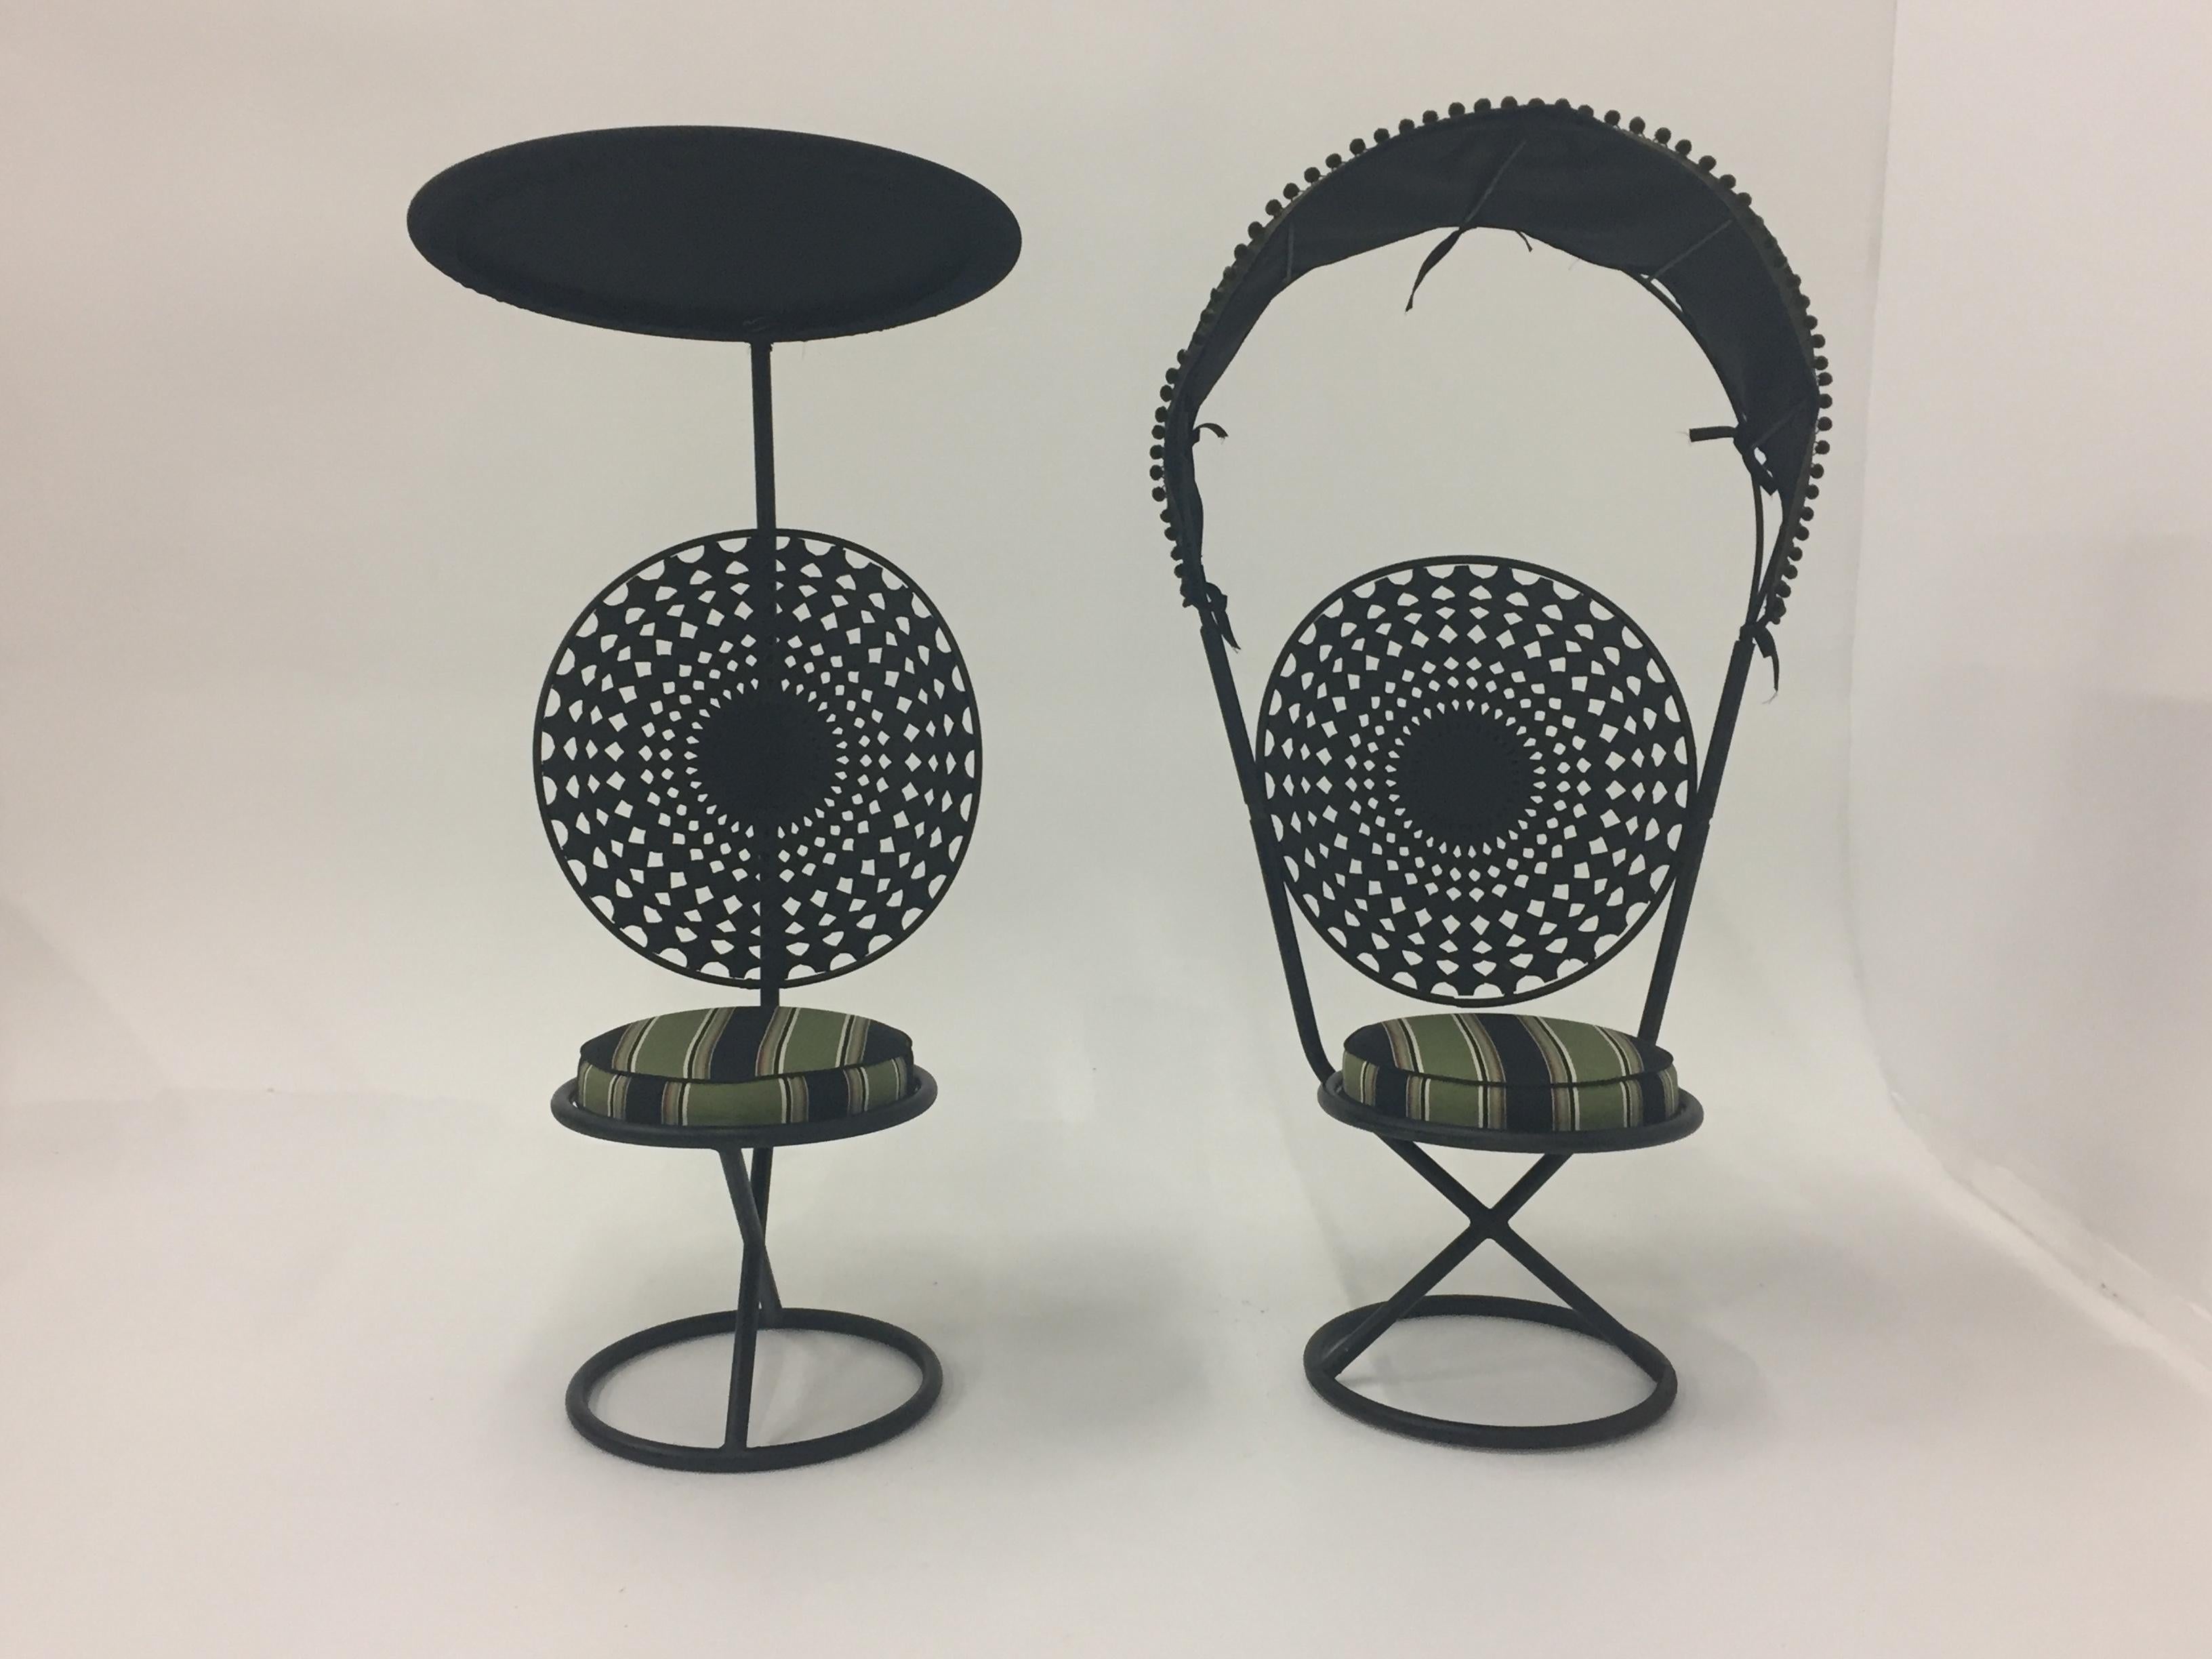 Two super chic fun Mid-Century Modern outdoor chairs made of black enameled steel, recently reupholstered with canvas cushions and canopies, one with a curved pom pom adorned canopy , the other with adjustable canopy that's saucer shaped.

Flat